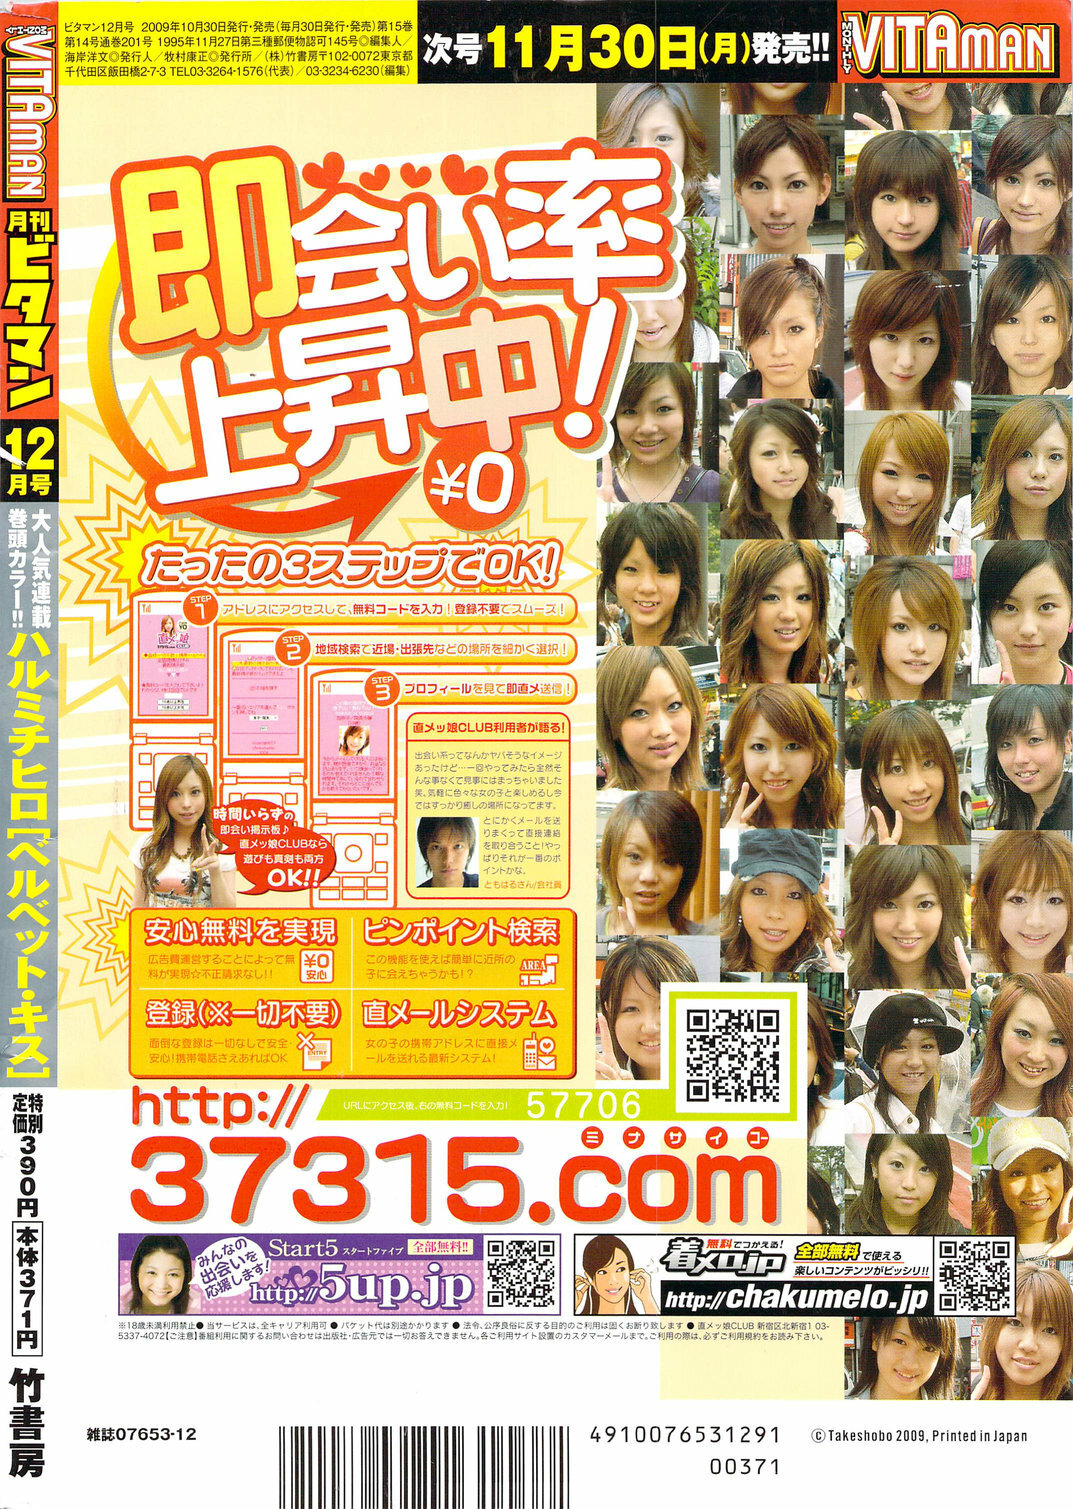 Monthly Vitaman 2009-12 page 280 full